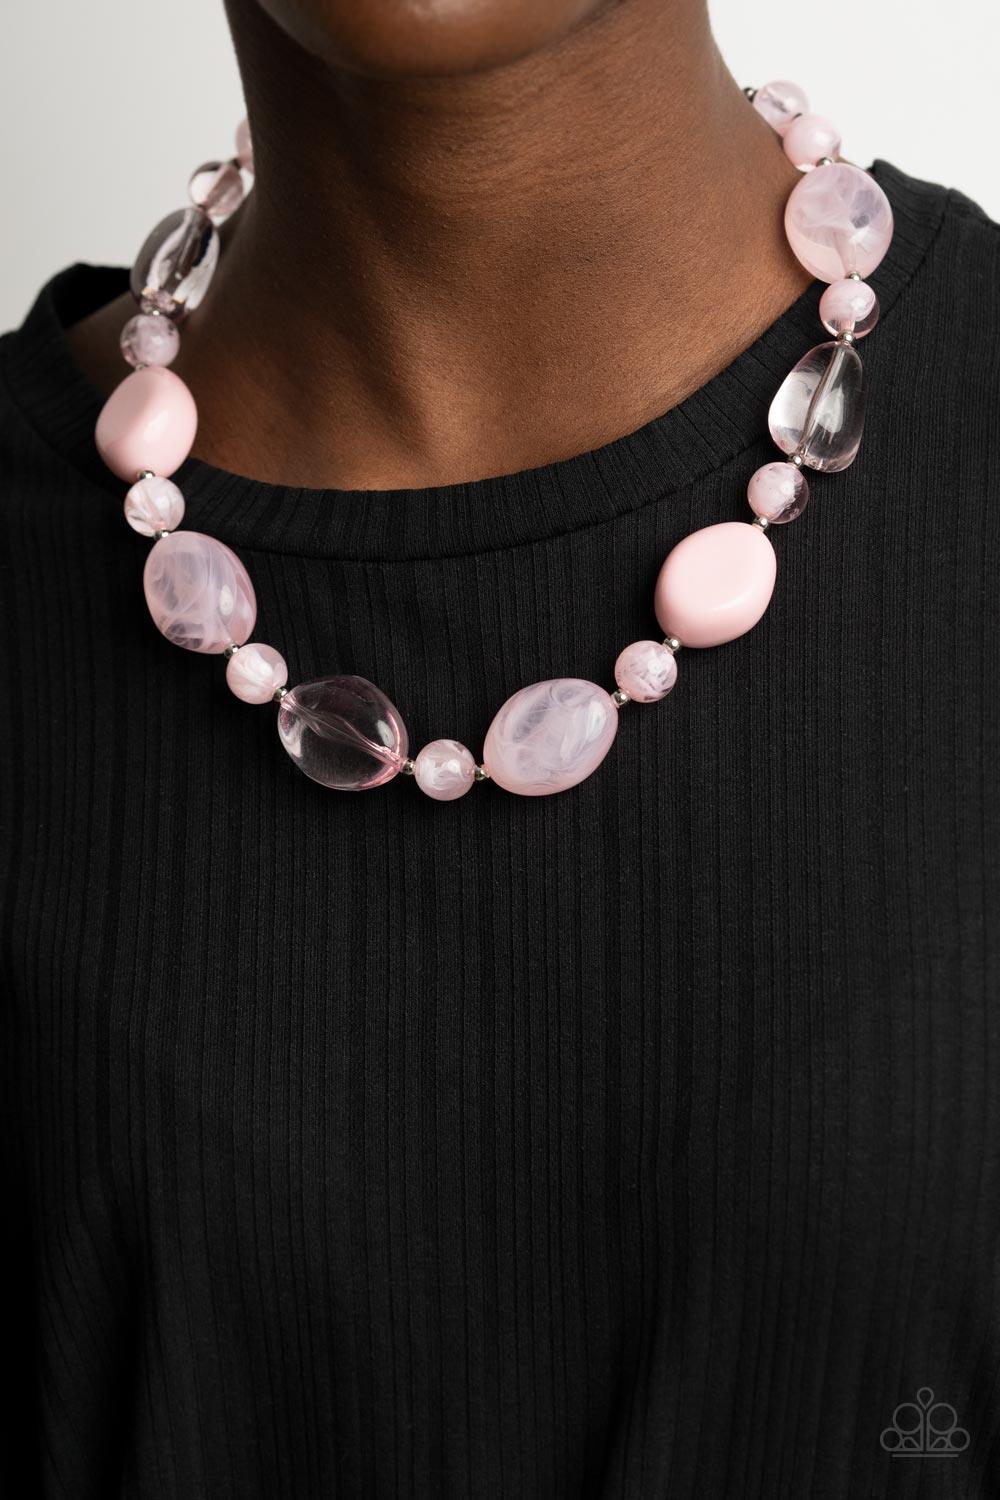 Paparazzi Accessories Staycation Stunner - Pink Featuring glassy, opaque, and solid finishes, an array of pink faux stone beads and dainty silver beads are threaded along an invisible wire below the collar, creating a colorful statement piece. Features an